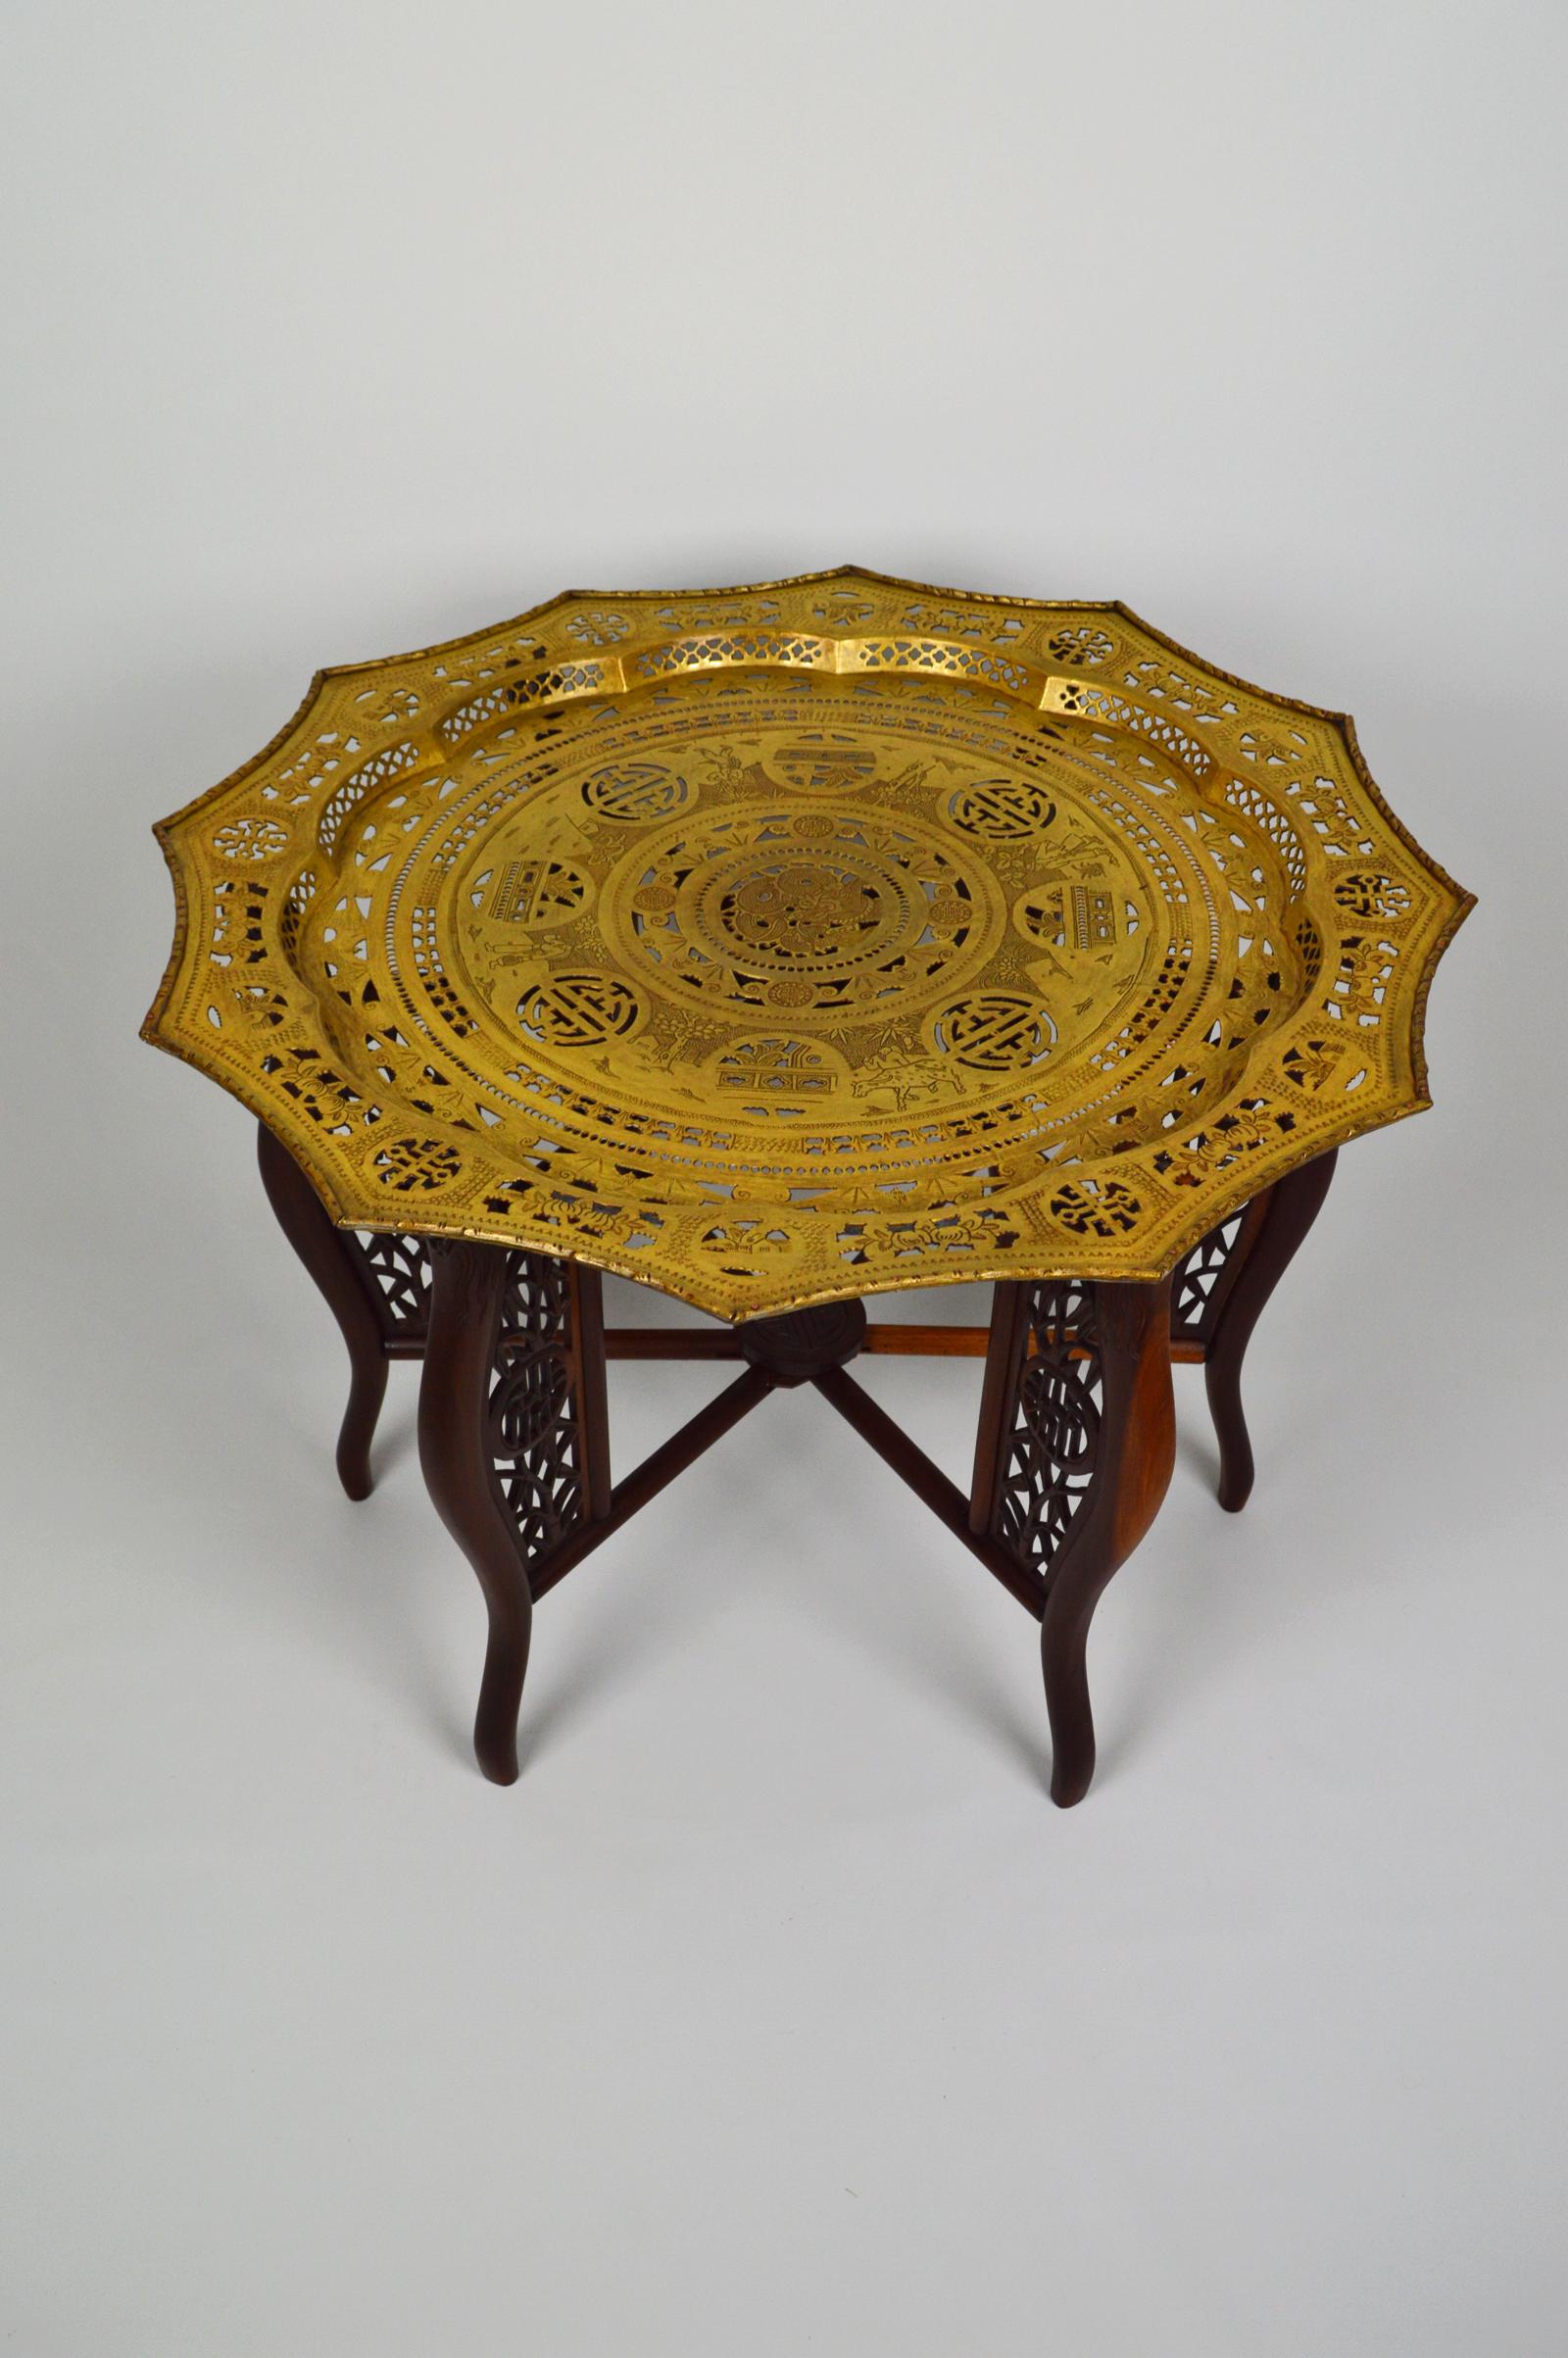 Japonisme Indochinese Dragons Carved Table with Brassware Tray Top, 1890s For Sale